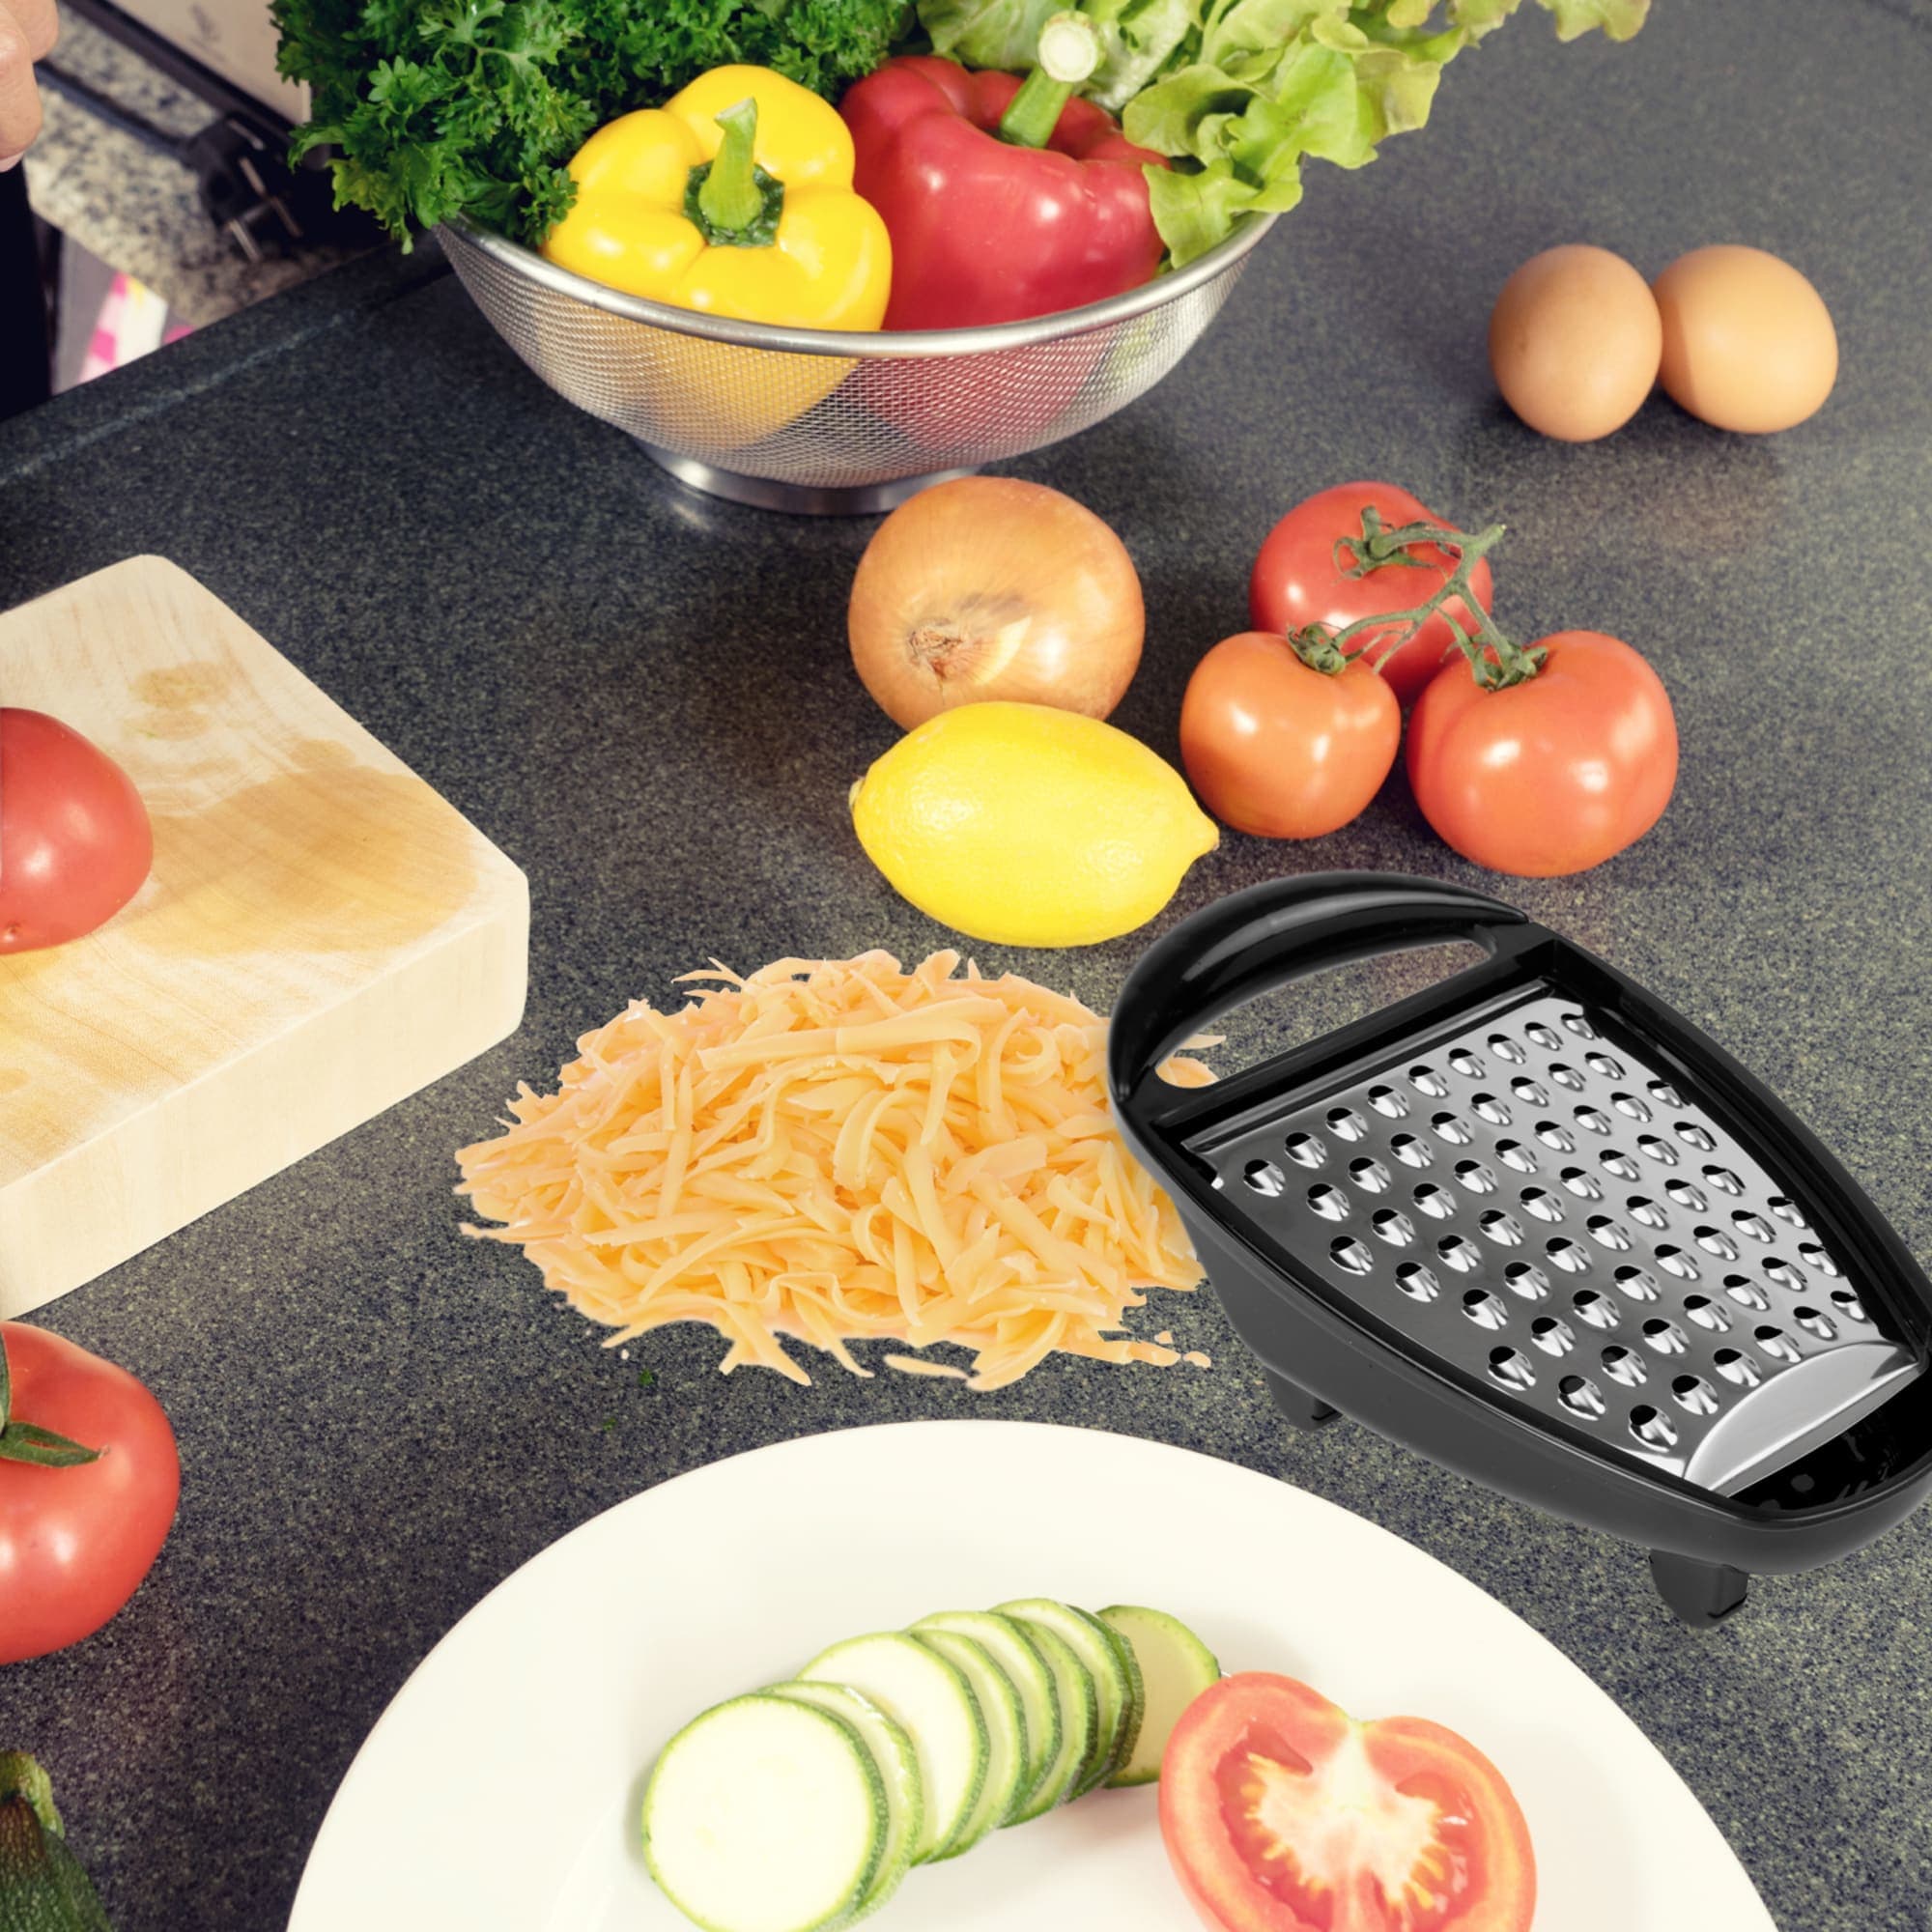 Home Basics Cheese Grater with Catch Tray $2.50 EACH, CASE PACK OF 24